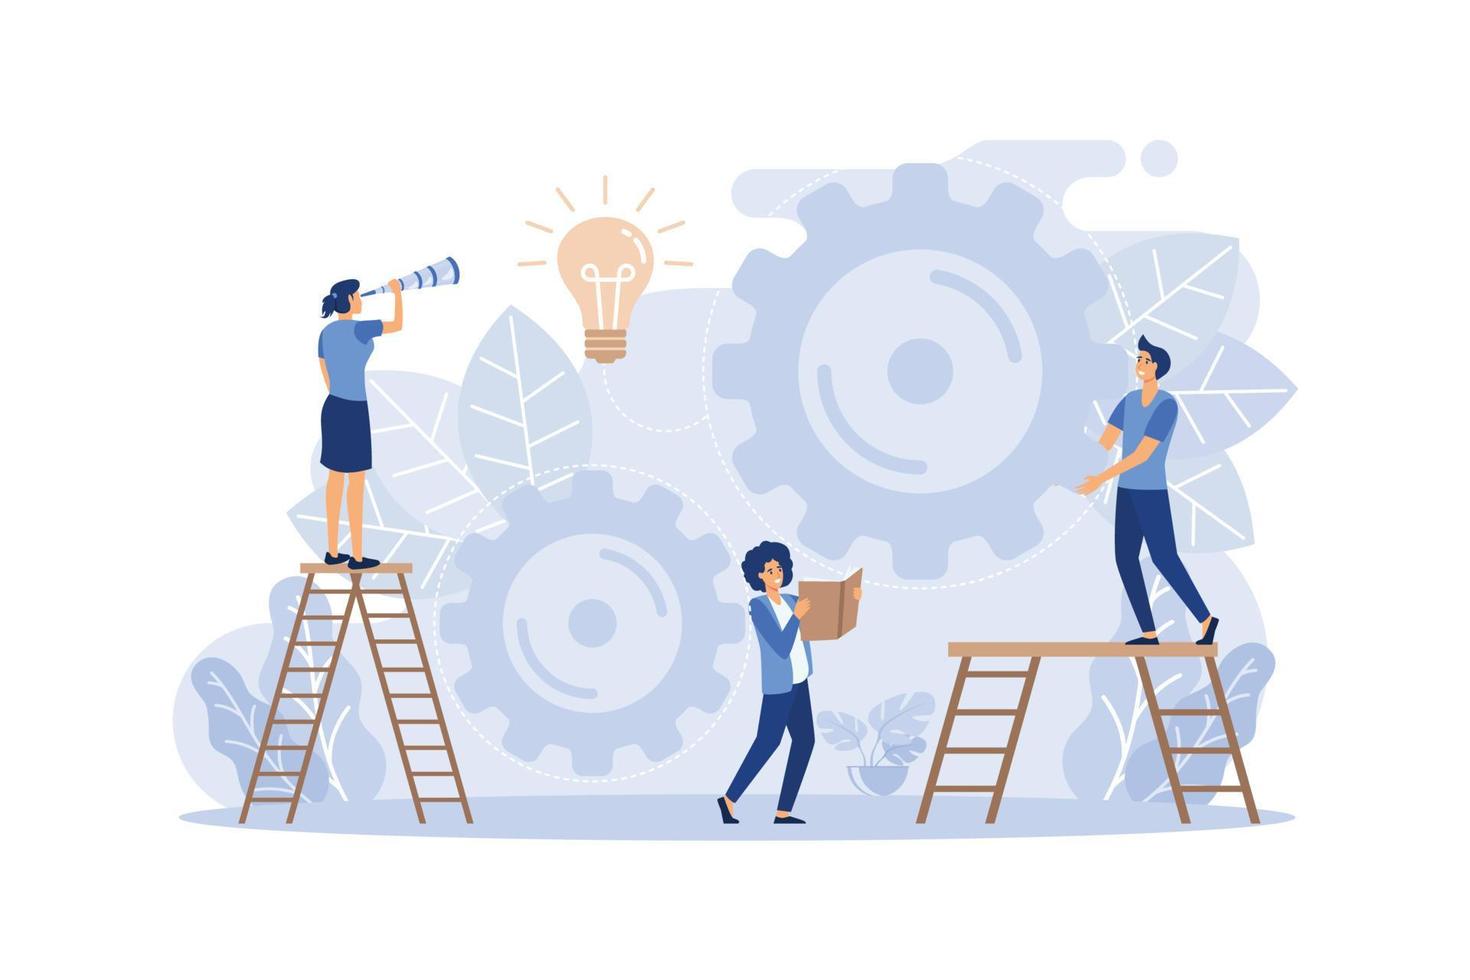 teamwork on finding new ideas, little people launch a mechanism, search for new solutions, flat design modern illustration vector